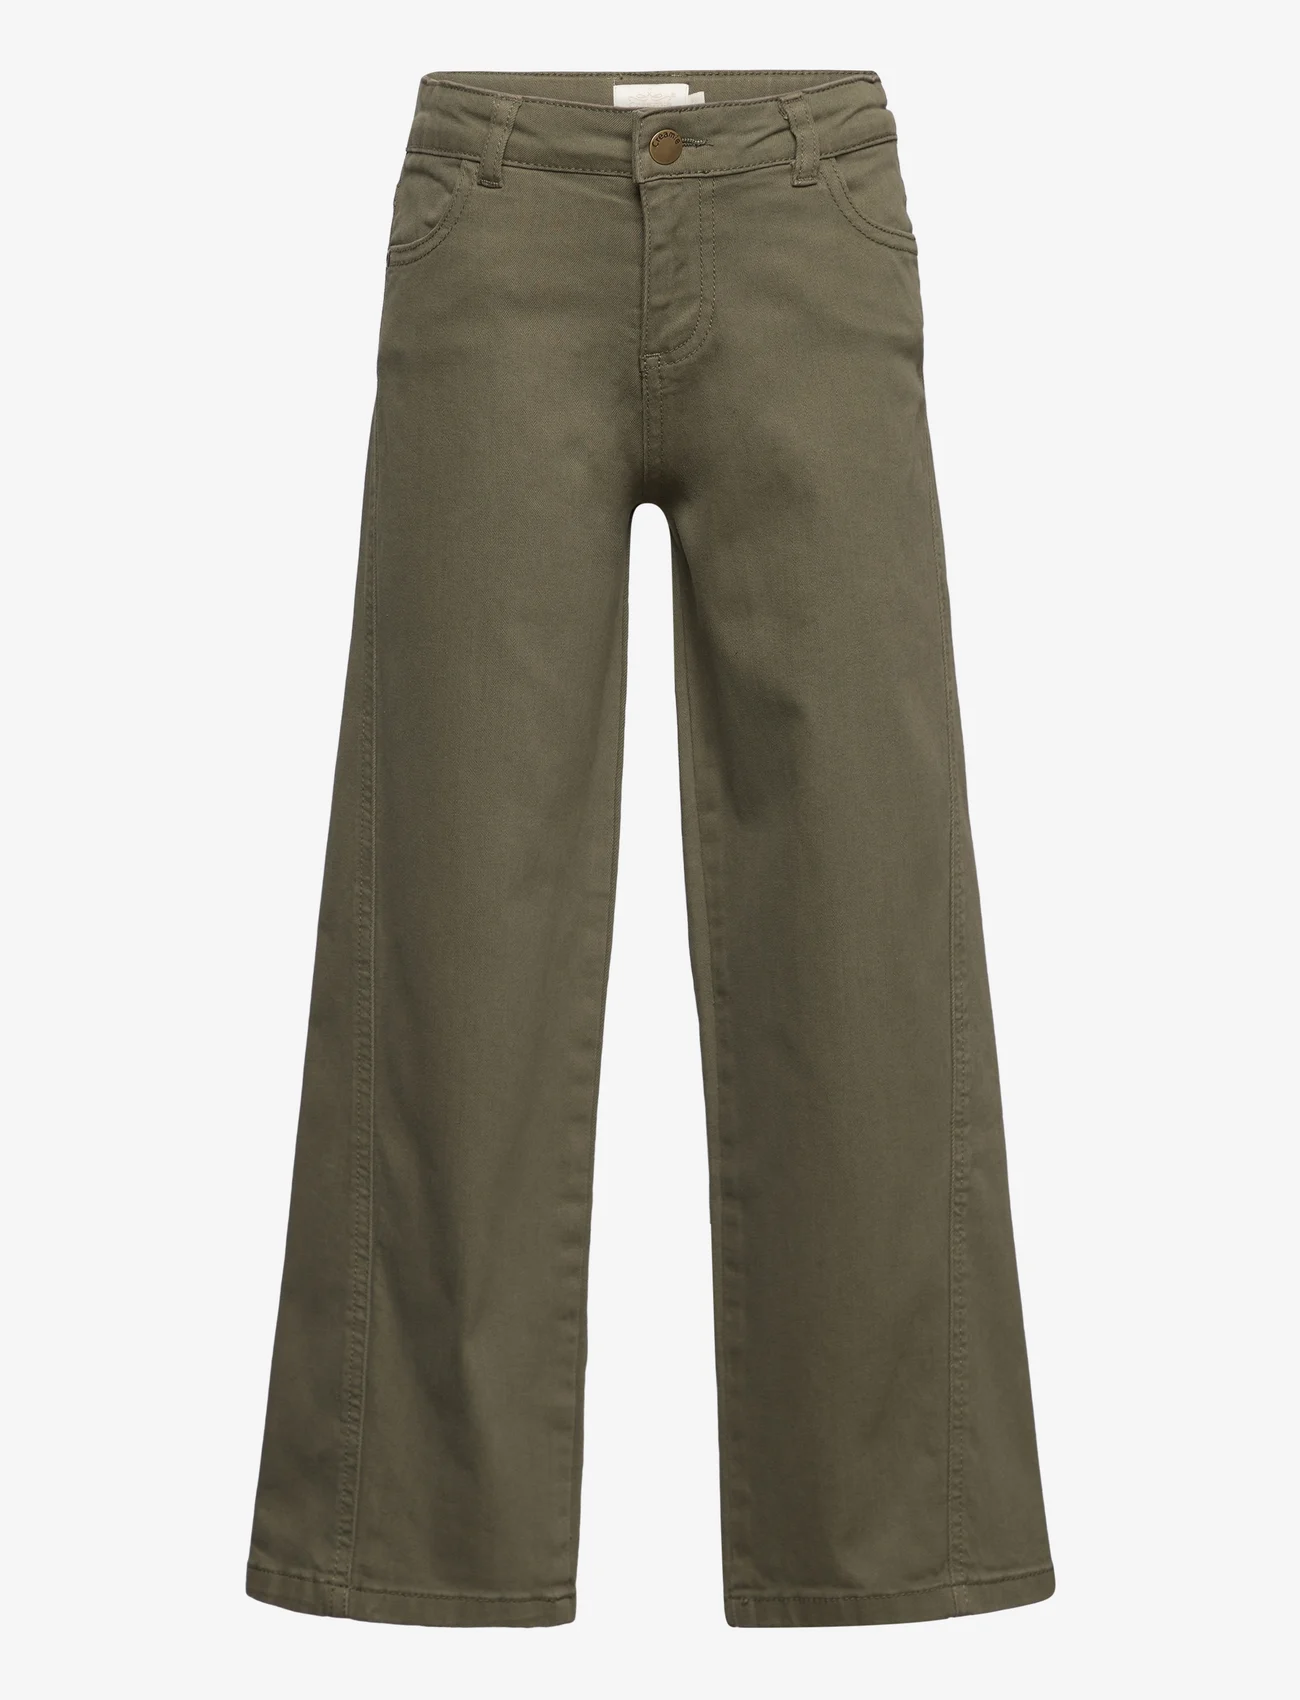 Creamie - Jeans Wide - brede jeans - olive night - 0